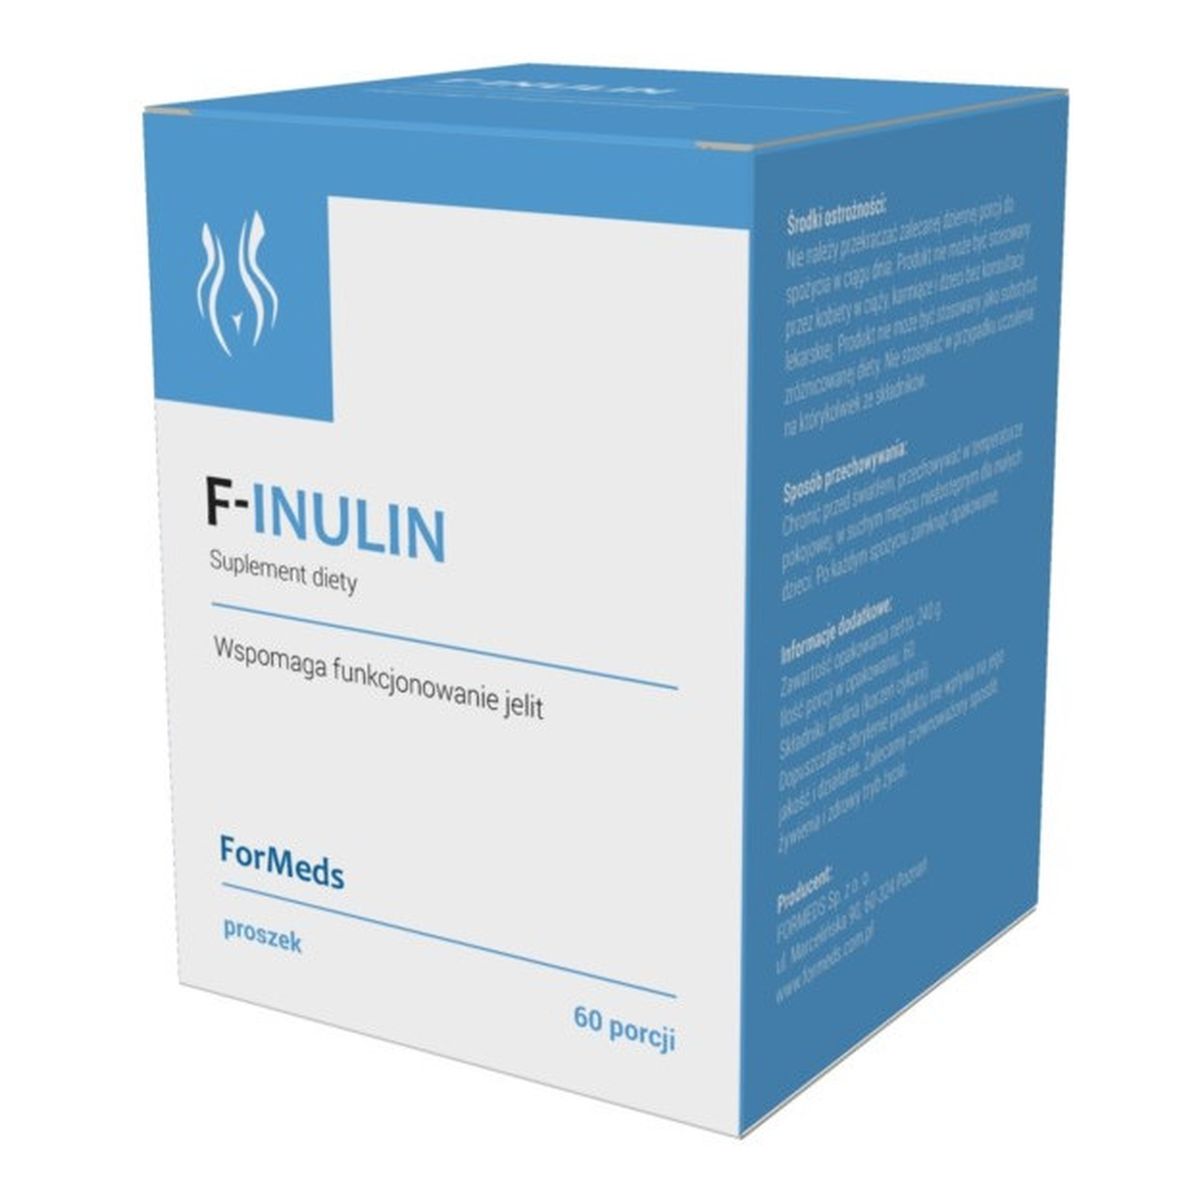 Formeds F-inulin suplement diety w proszku 240g